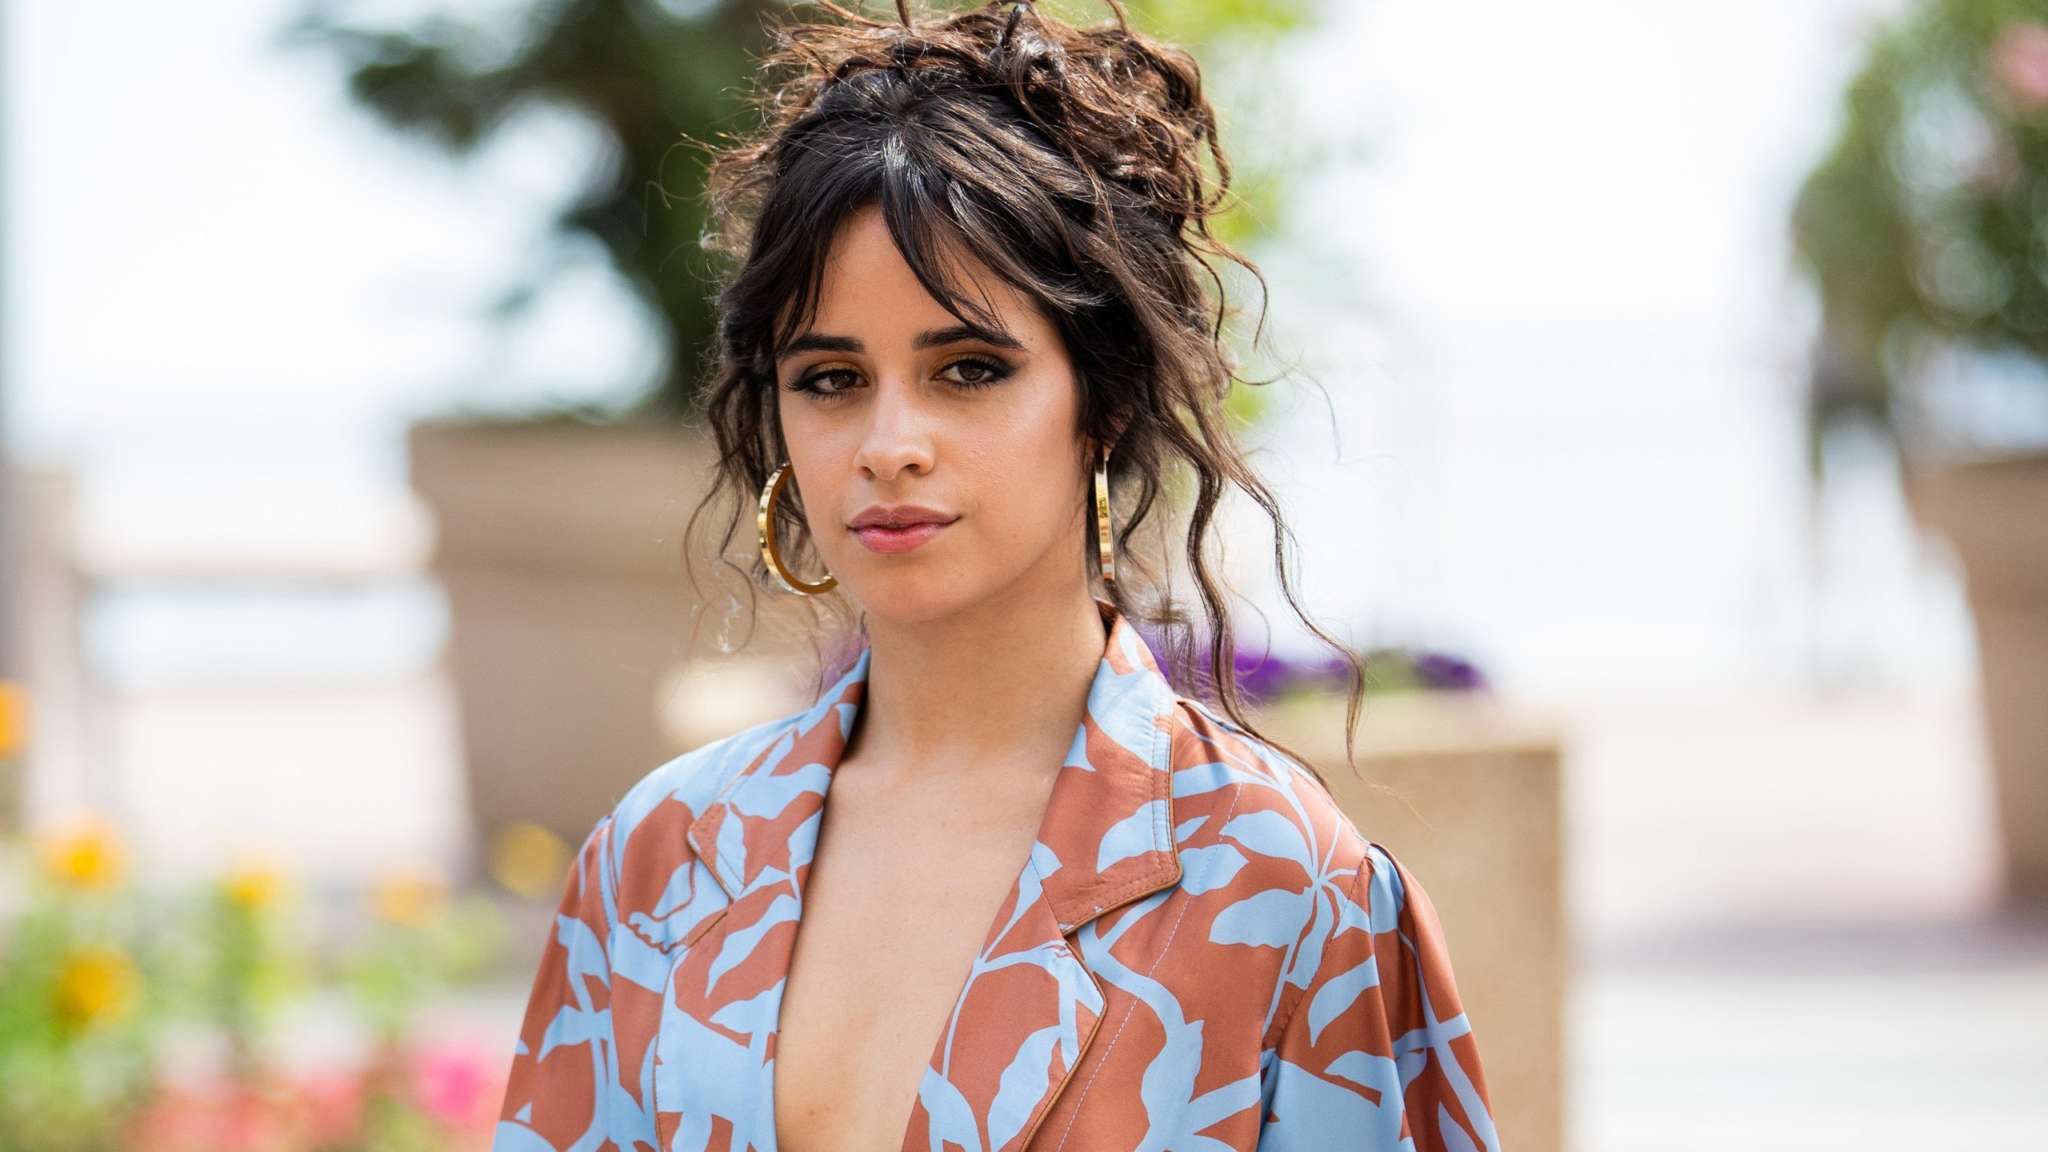 Camila Cabello Opens Up About Her Struggle With Anxiety And OCD For The Fir...